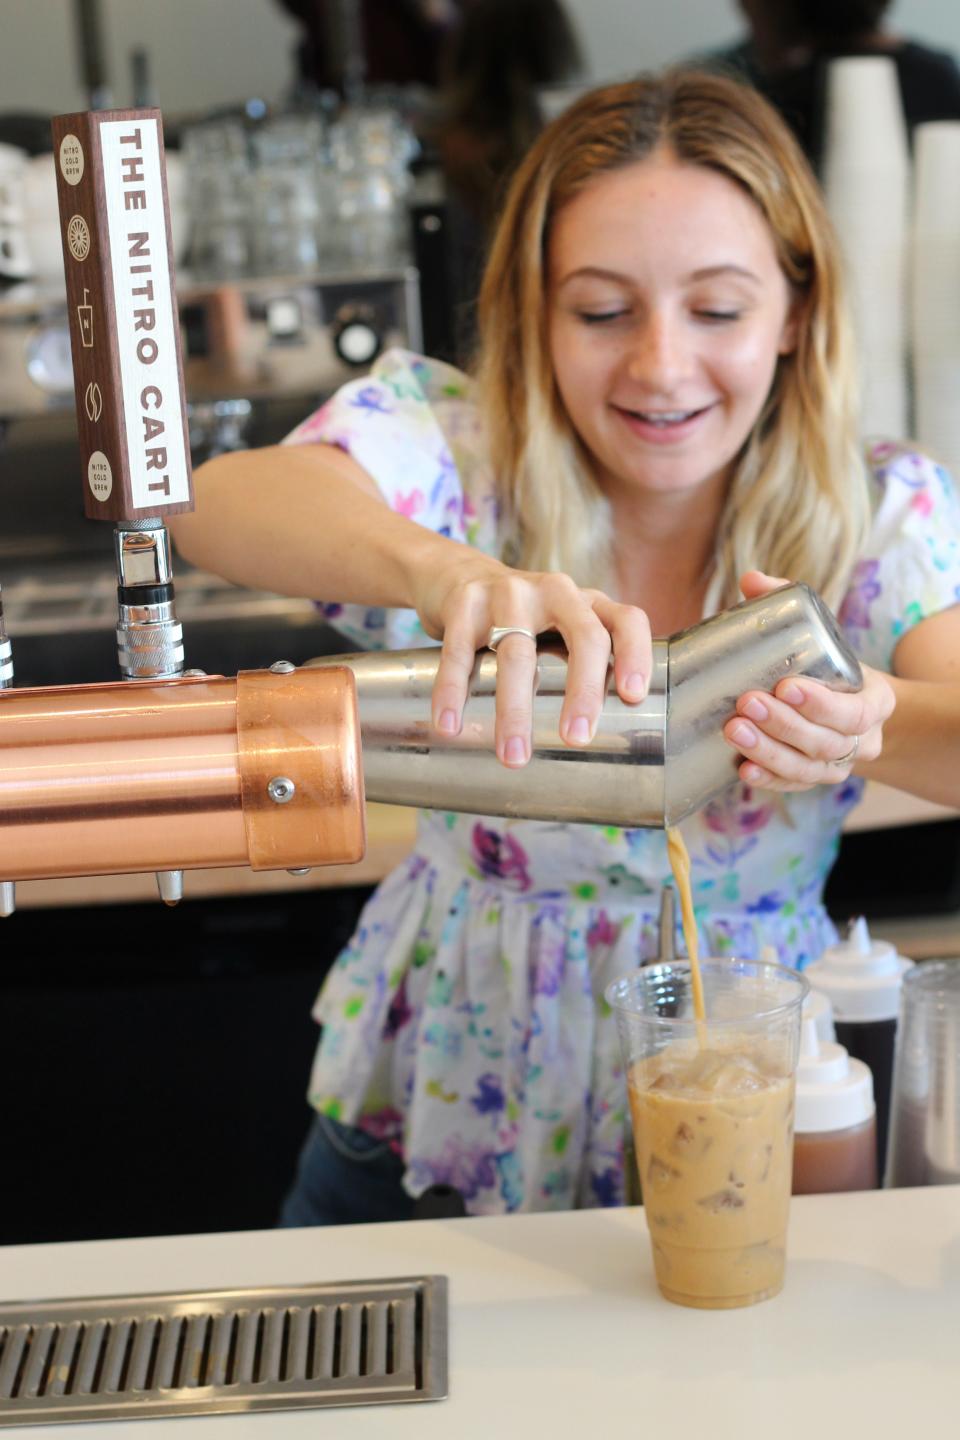 Audrey Finocchario, co-owner of the Nitro Bar in Newport, mixes up a craft coffee drink in 2019.